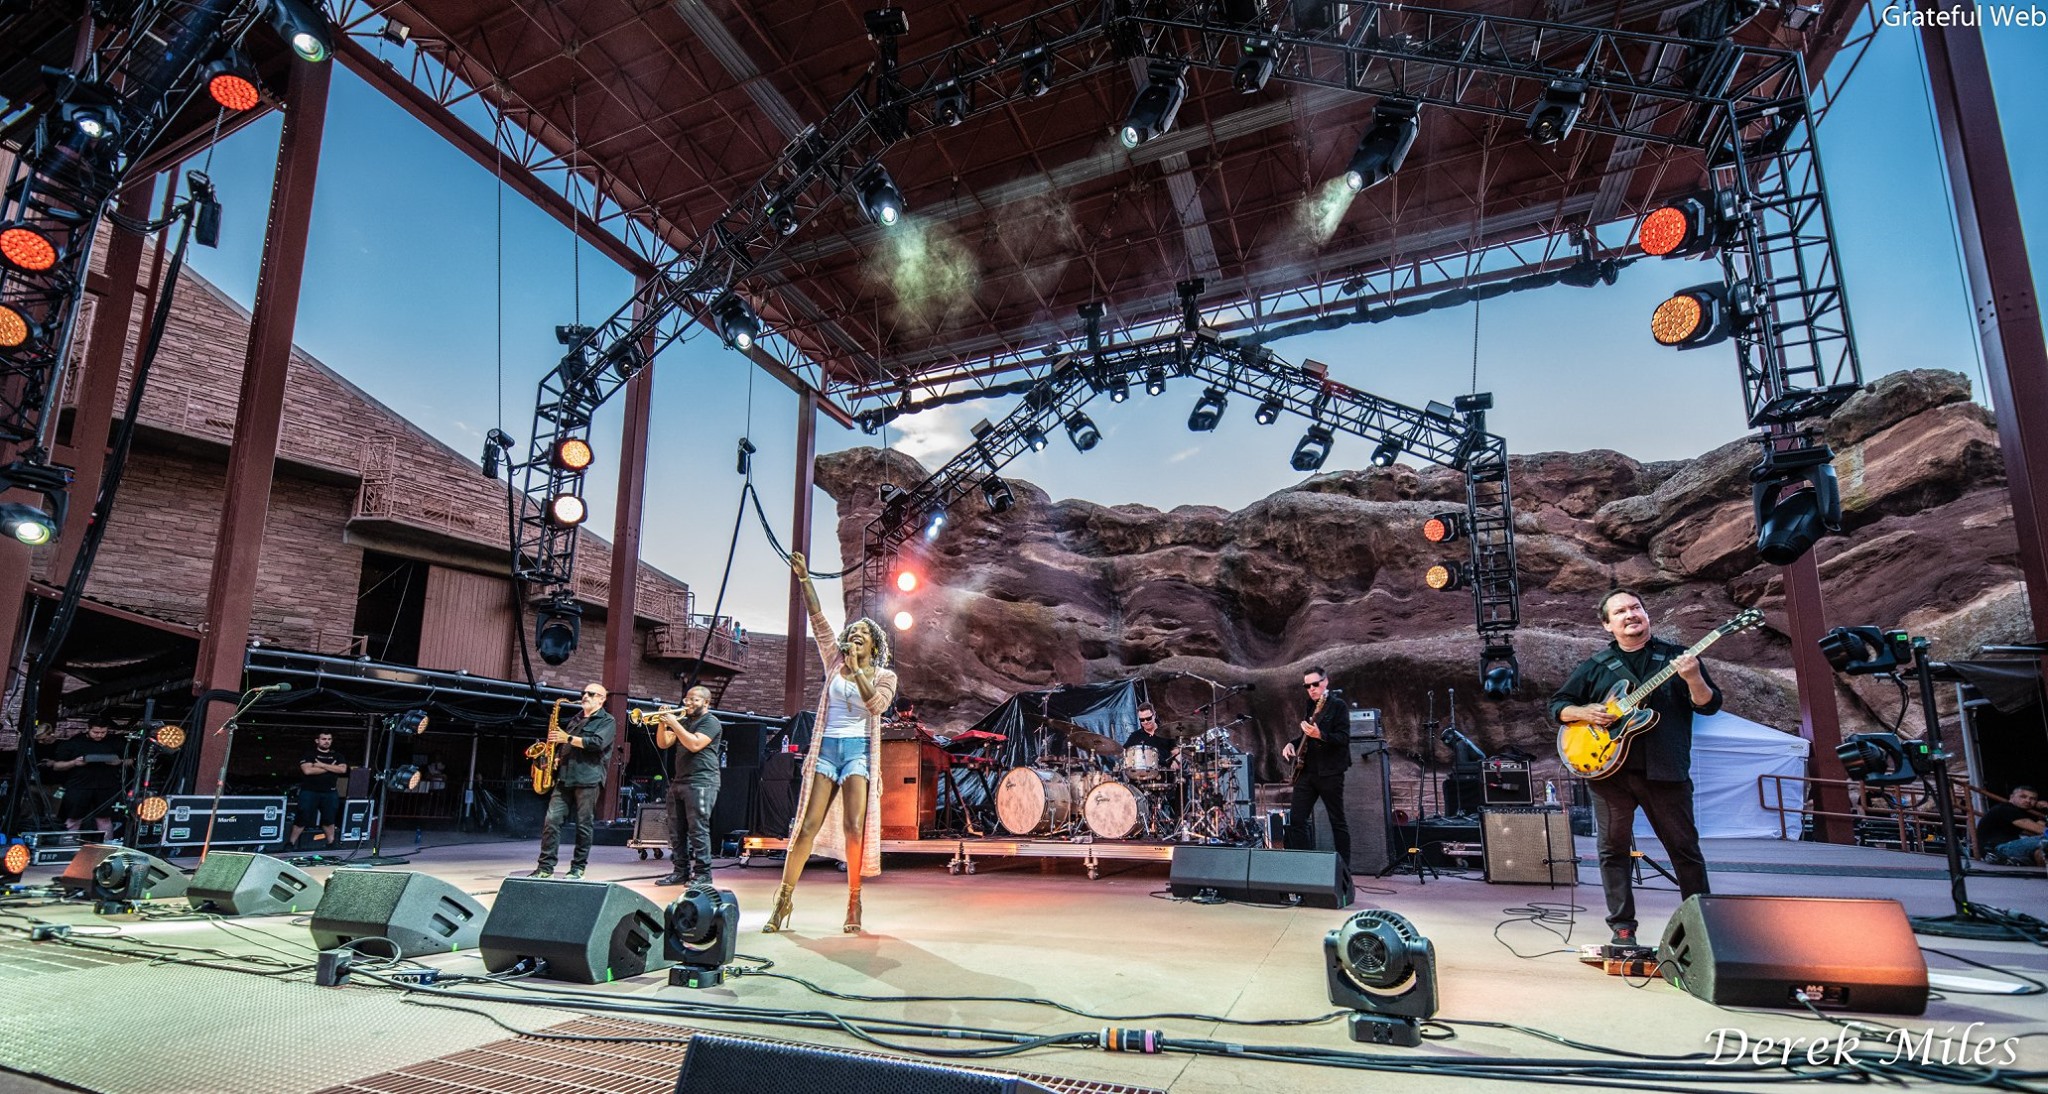 Erica Falls with Galactic | Red Rocks Amphitheatre